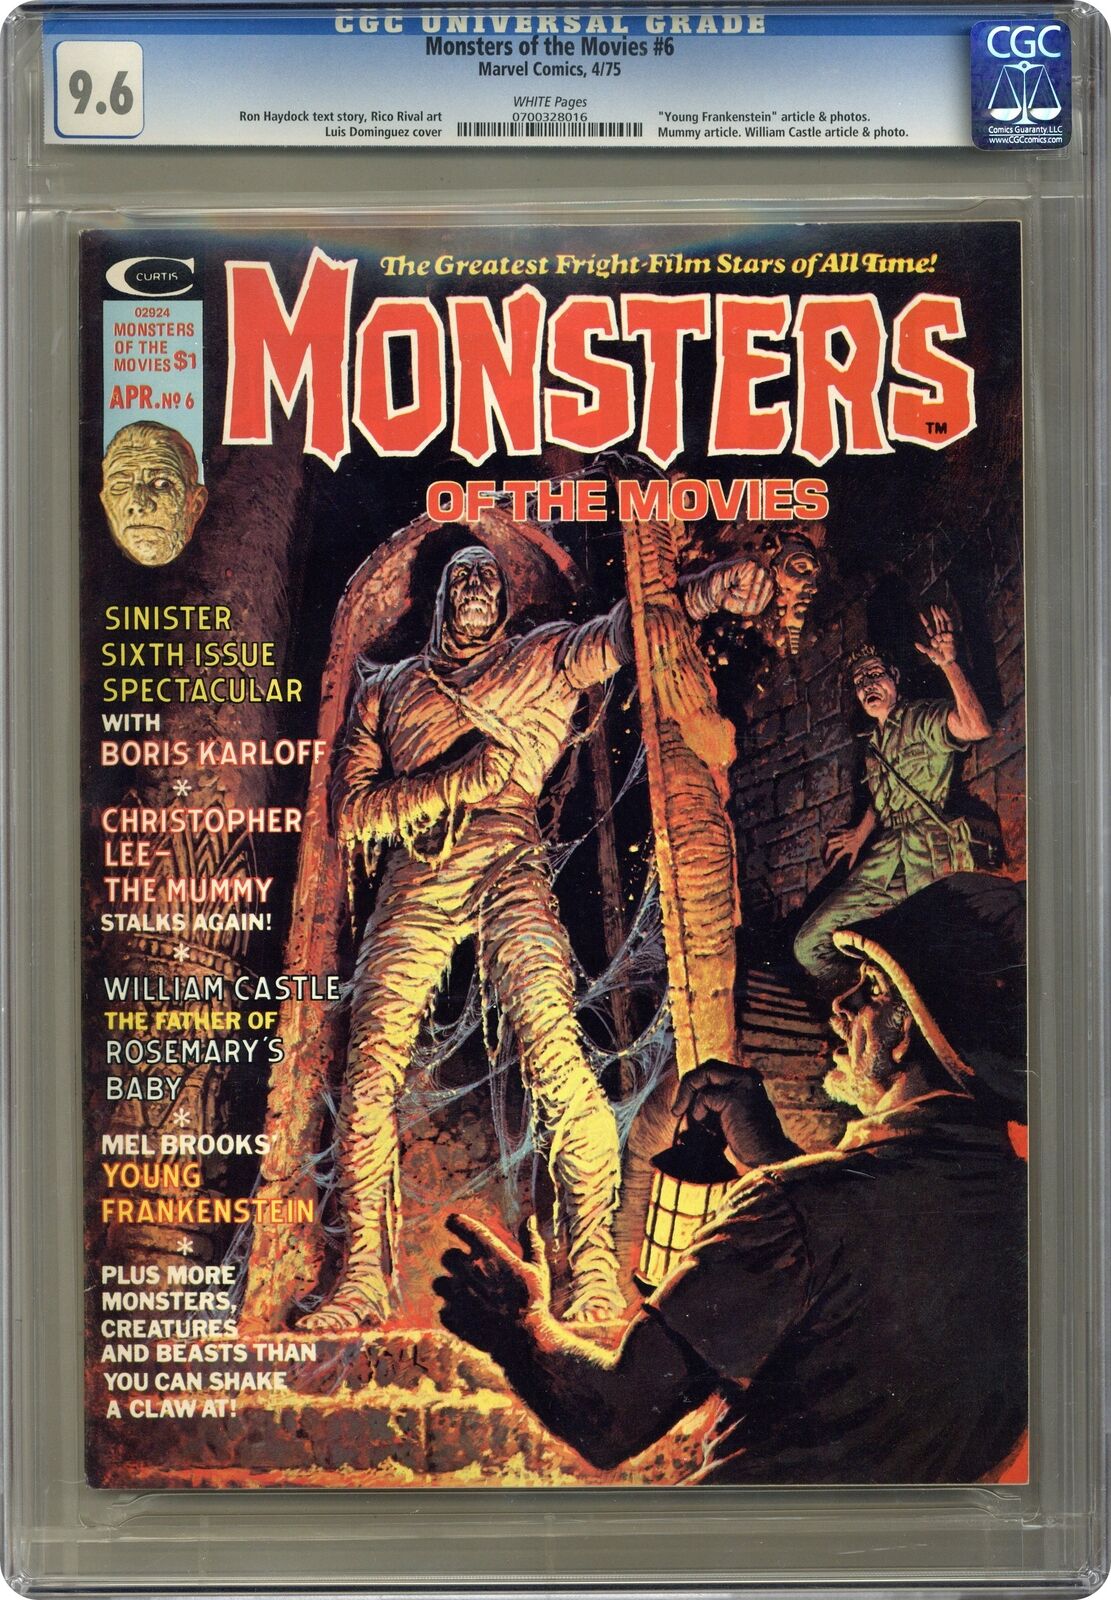 Monsters of the Movies #6 CGC 9.6 1975 0700328016